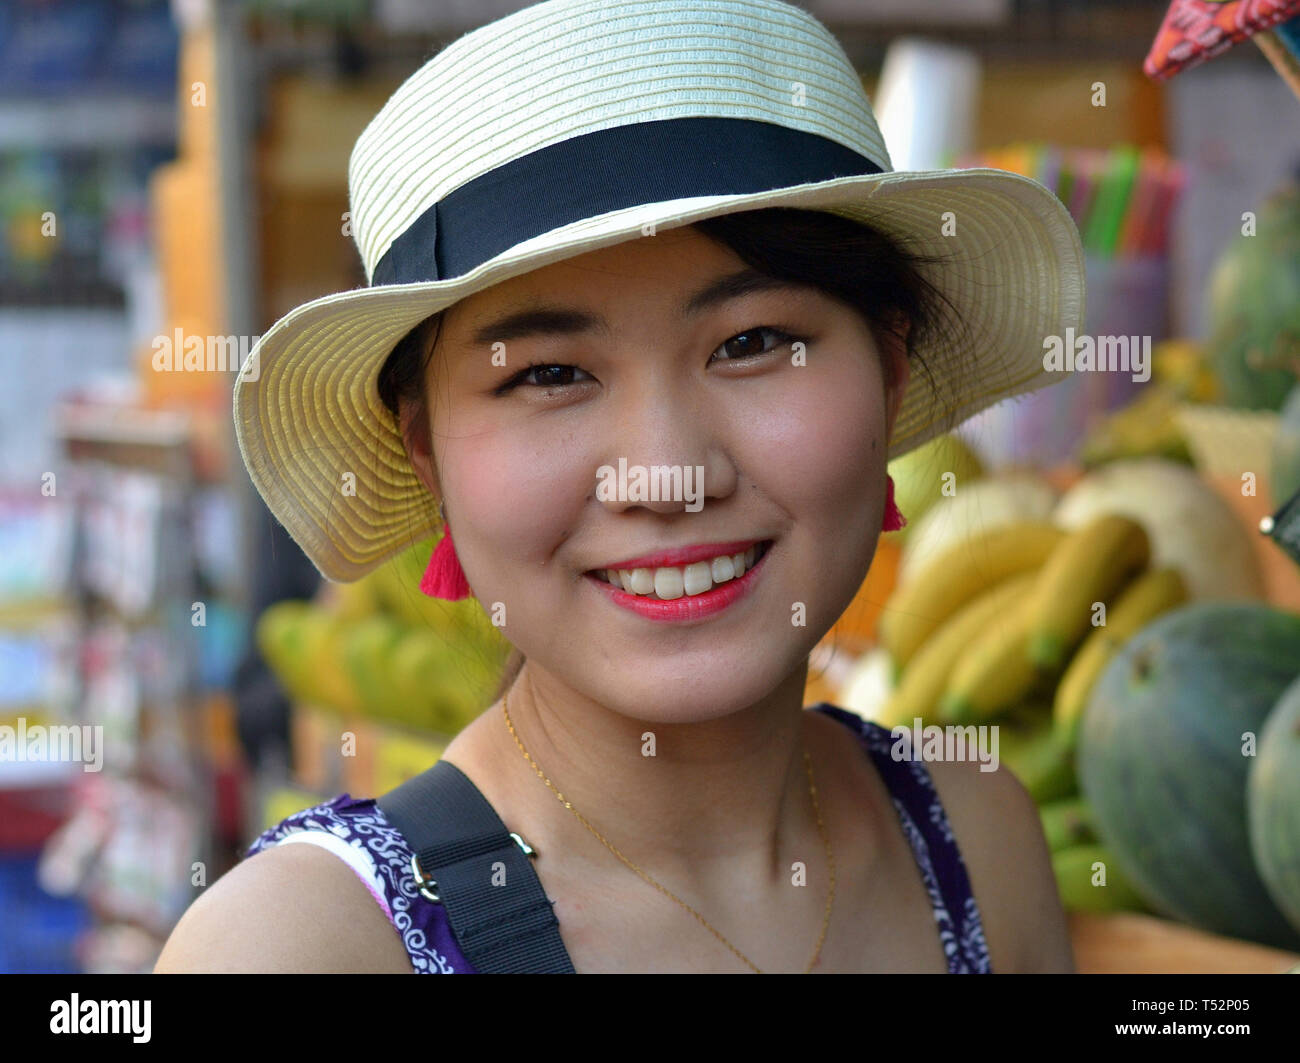 Young Asian beauty with a straw hat demonstrates a social smile (controlled or “posed” [or “fake”] smile); image no. 1 of 2. Stock Photo